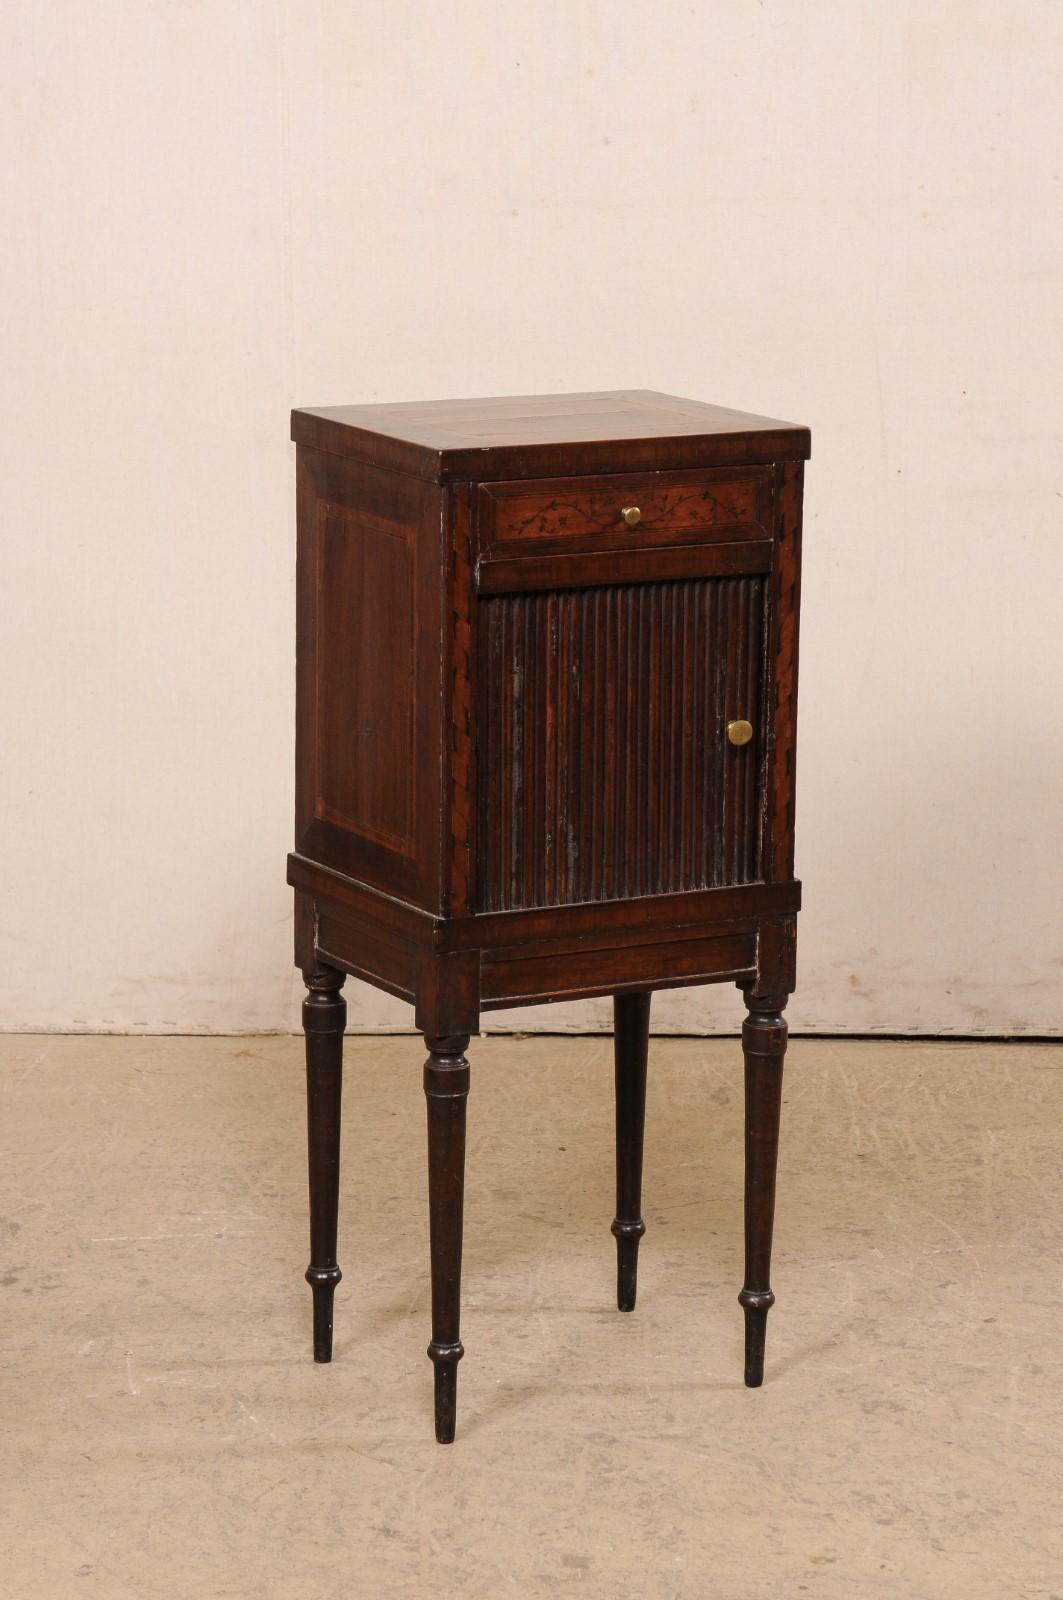 An Italian small-sized walnut comodino from the turn of the 18th and 19th century. This antique side chest/table from Italy features decorative inlay banding at topside, with case housing a single drawer at top (adorn in a sweet foliage motif), over